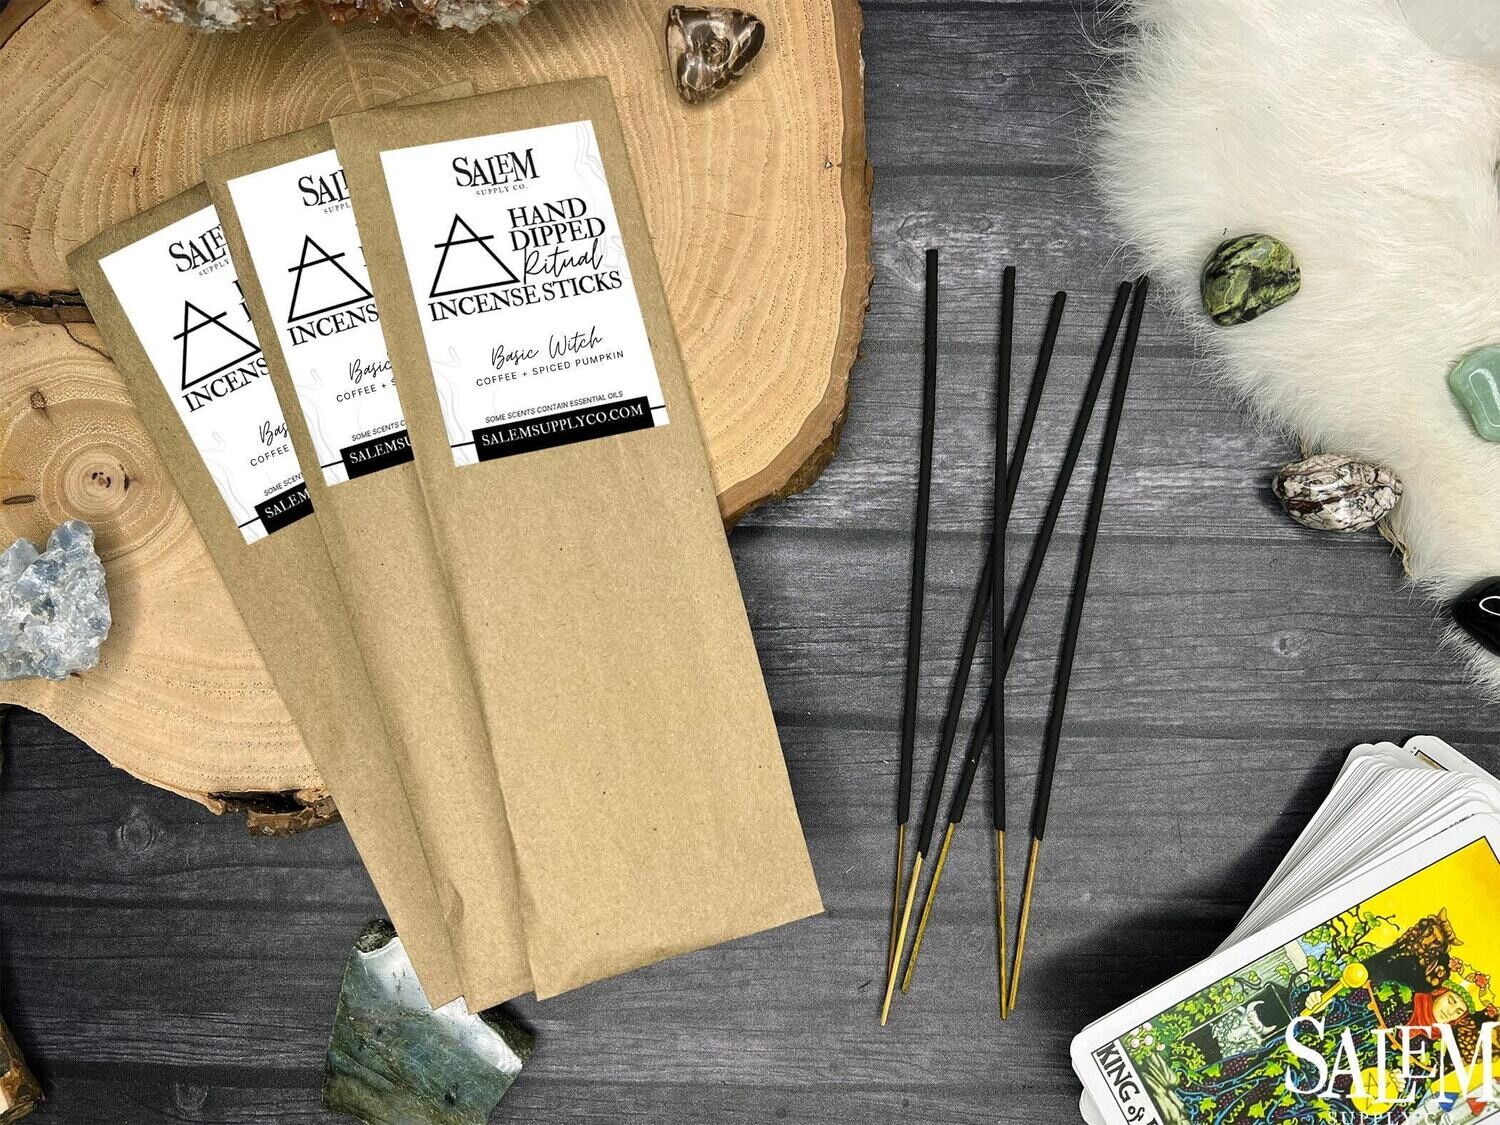 BASIC WITCH Hand Dipped Ritual Incense Sticks